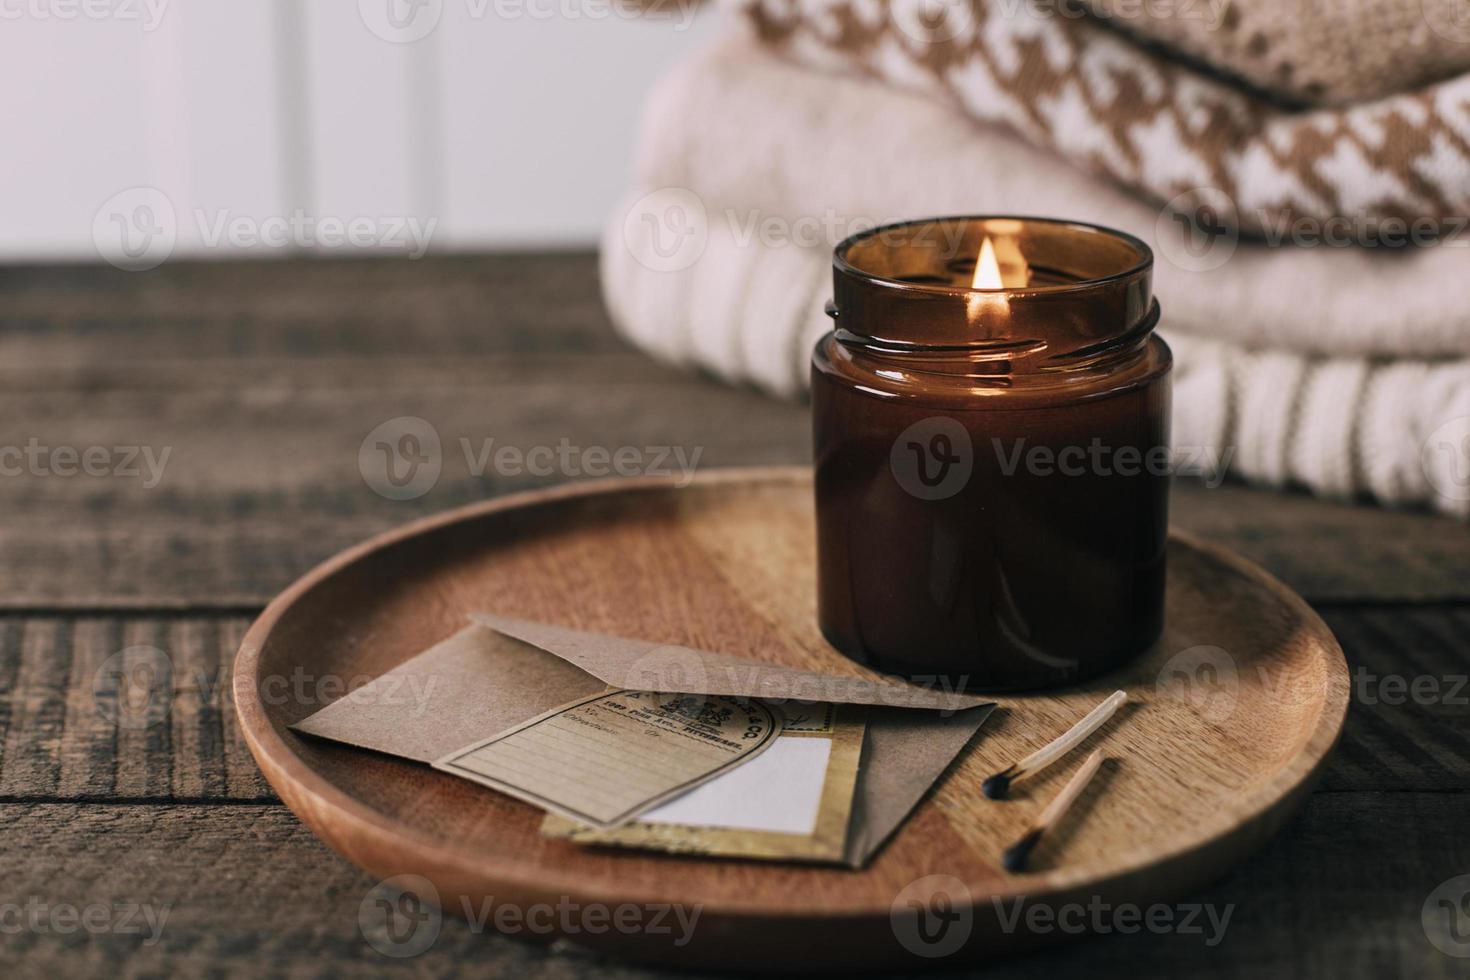 Burning candle in small amber glass jar with wooden wick, stack knitted season sweaters. Cozy lifestyle, hygge concept photo